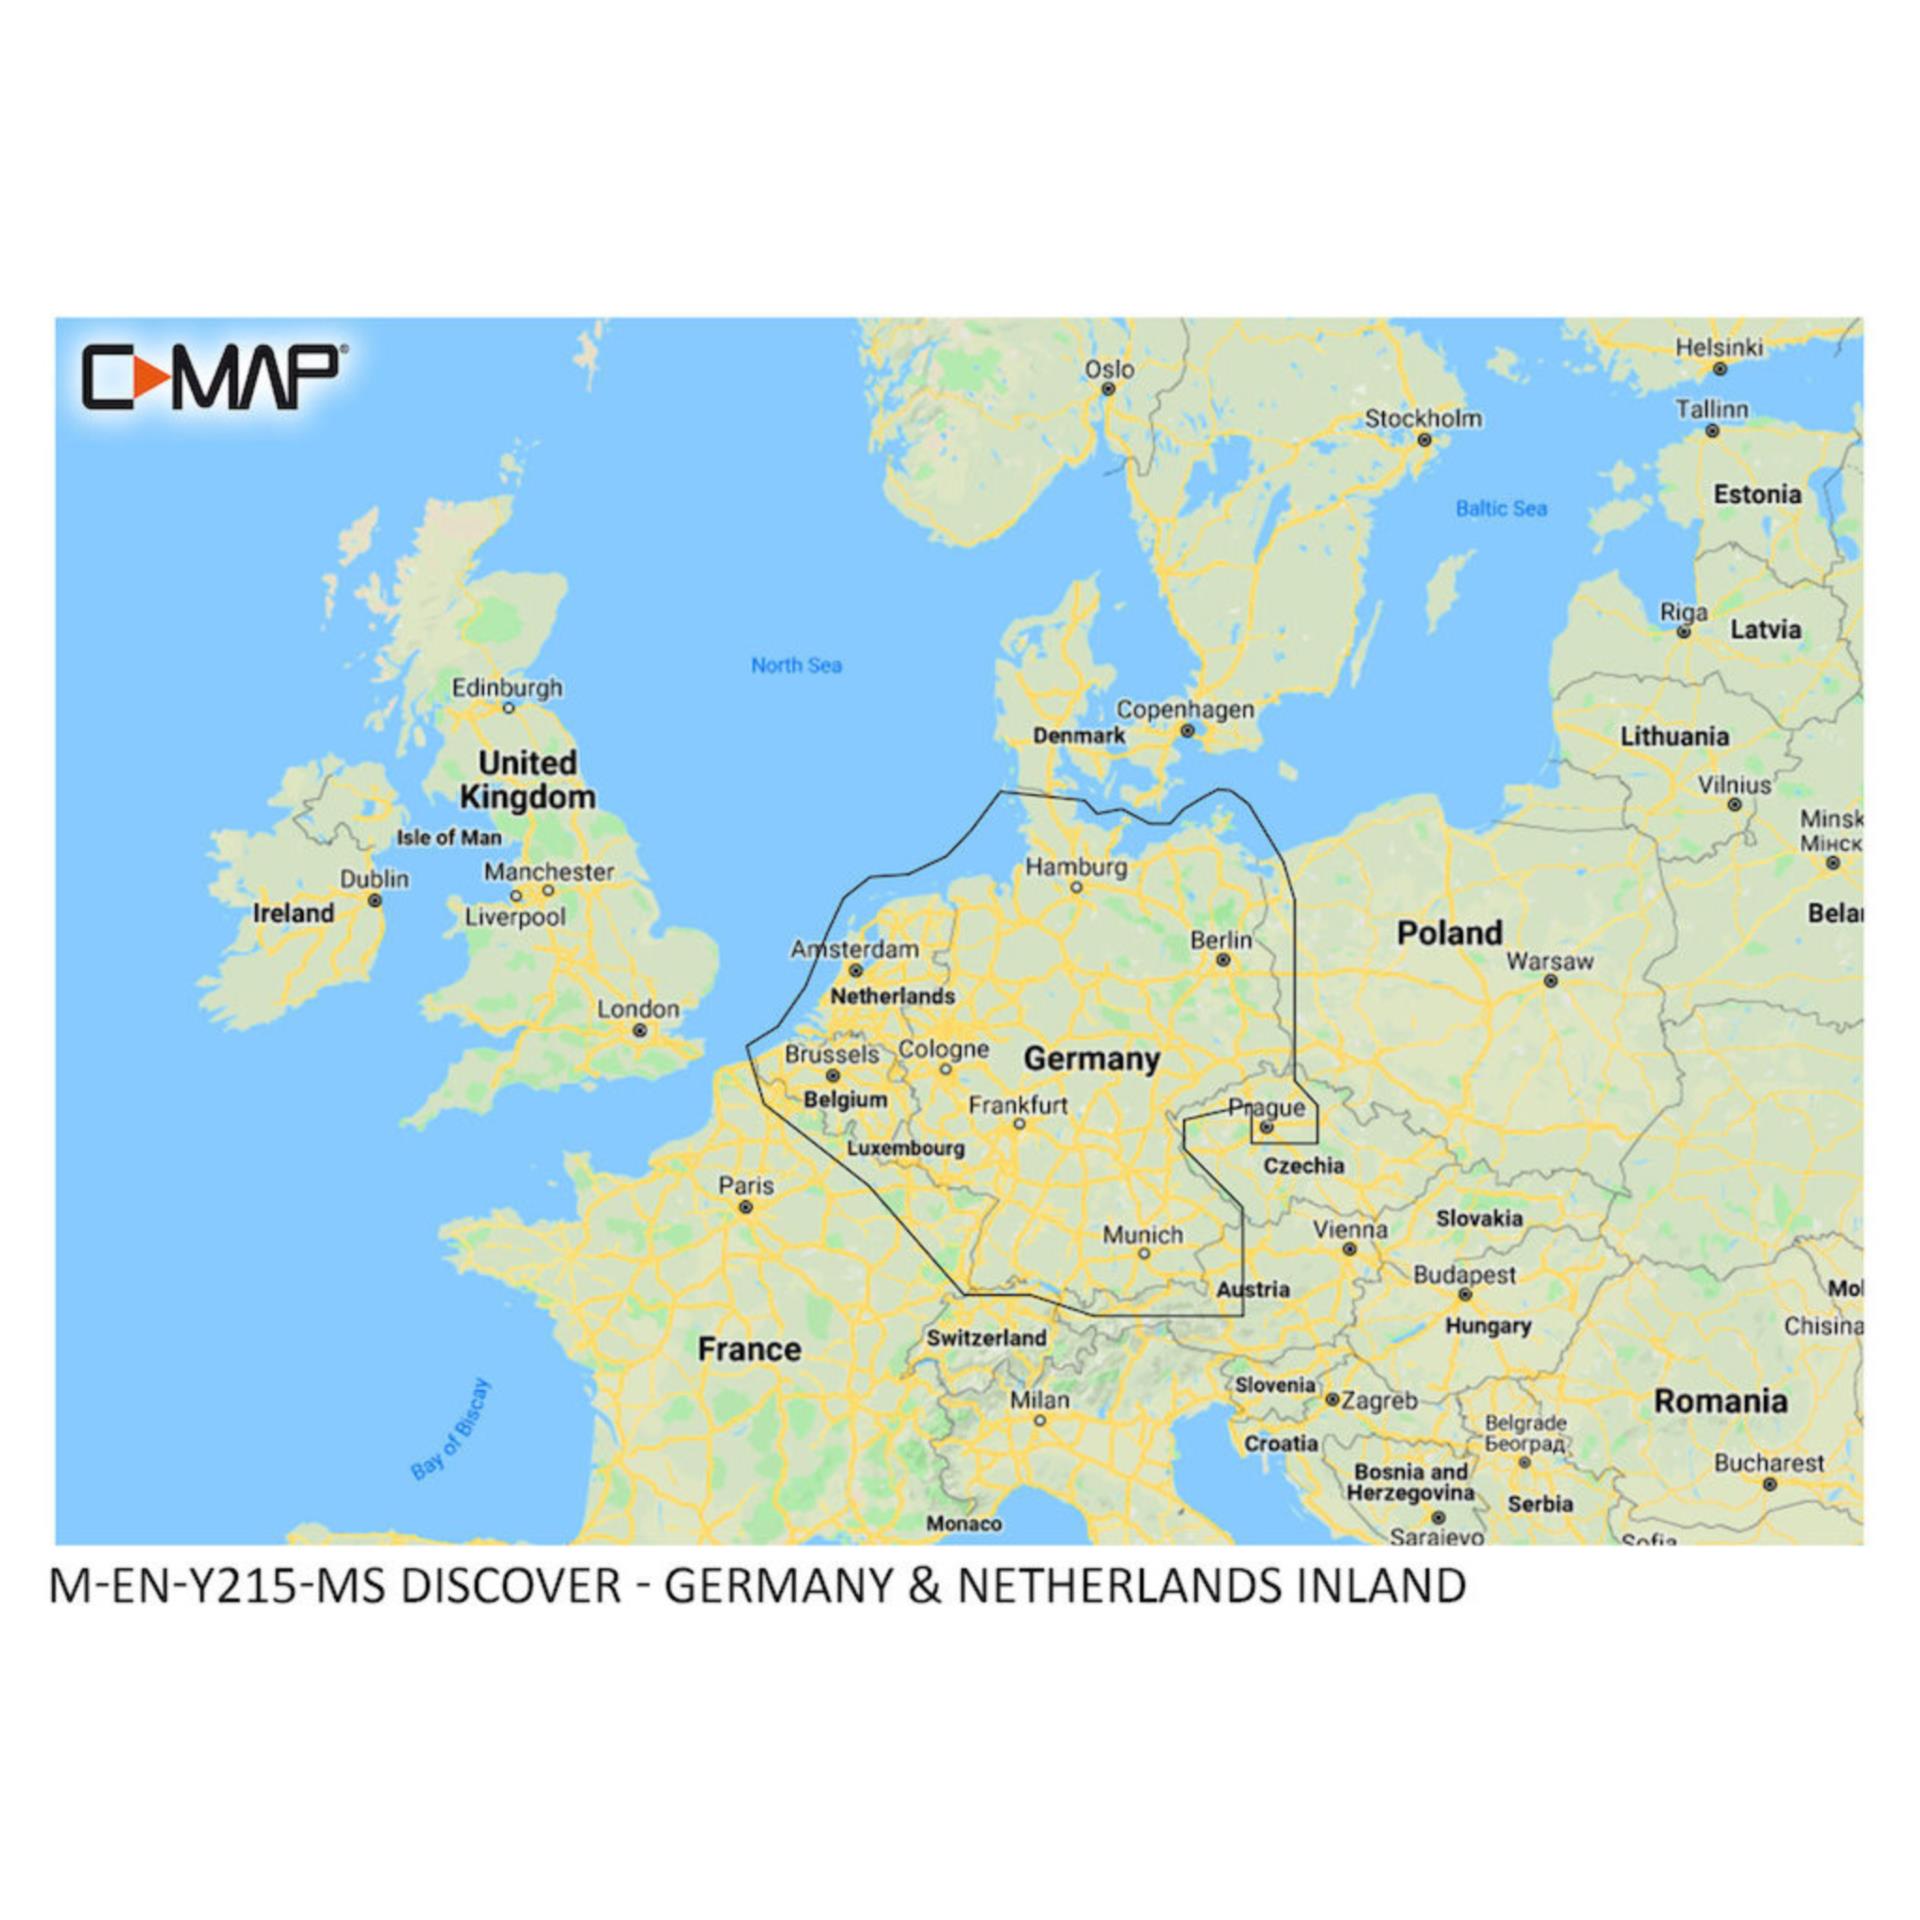 DISCOVER-GERMANY & NETHERLAND INLAND